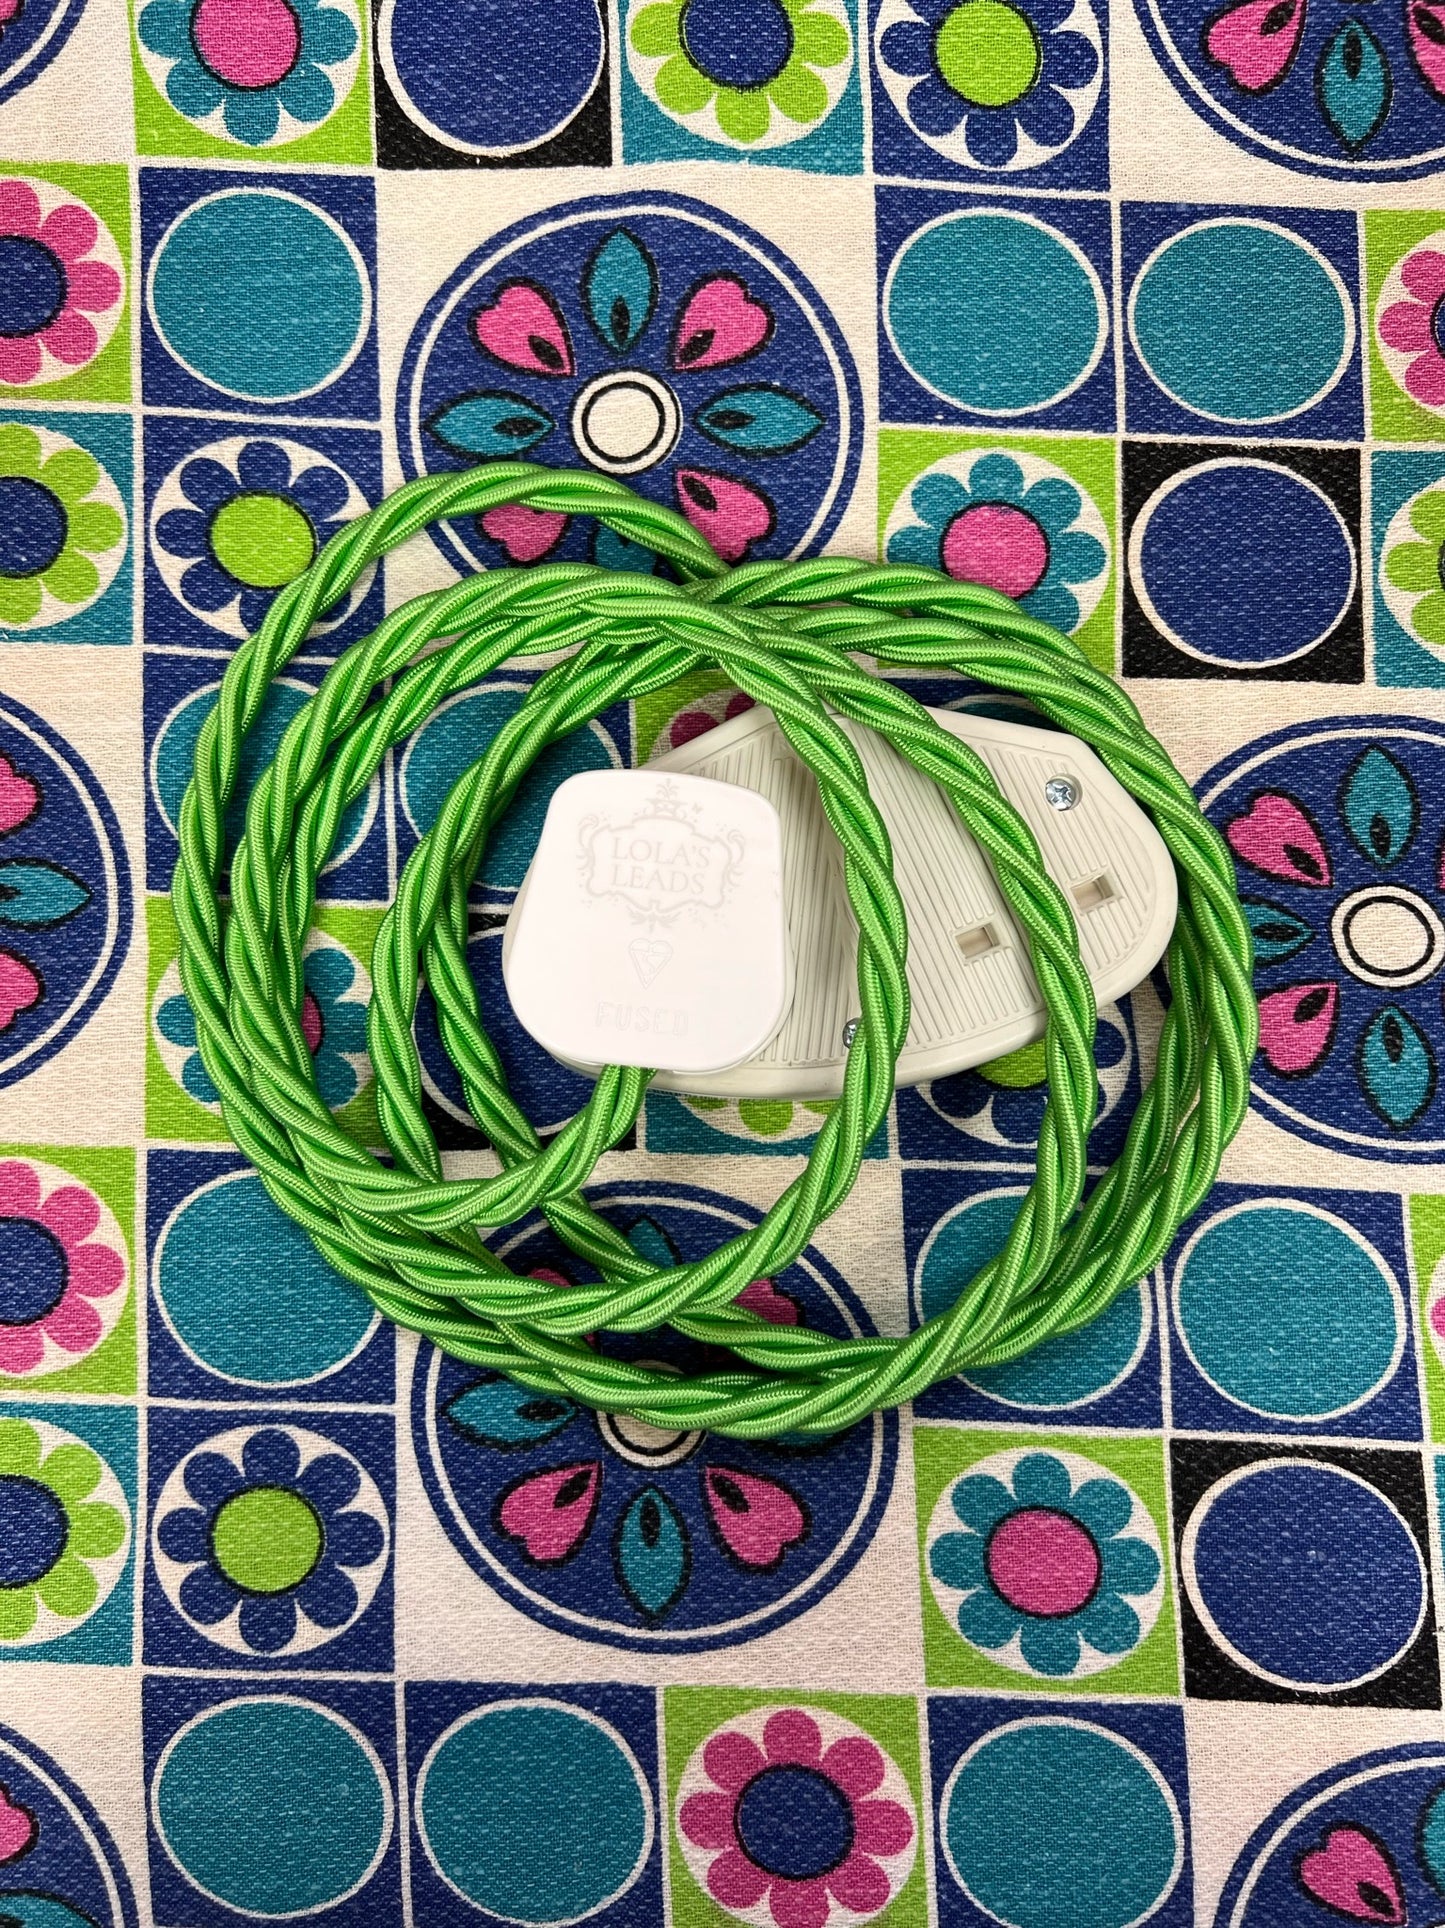 Parakeet - Lola's Leads Fabric Extension Cable